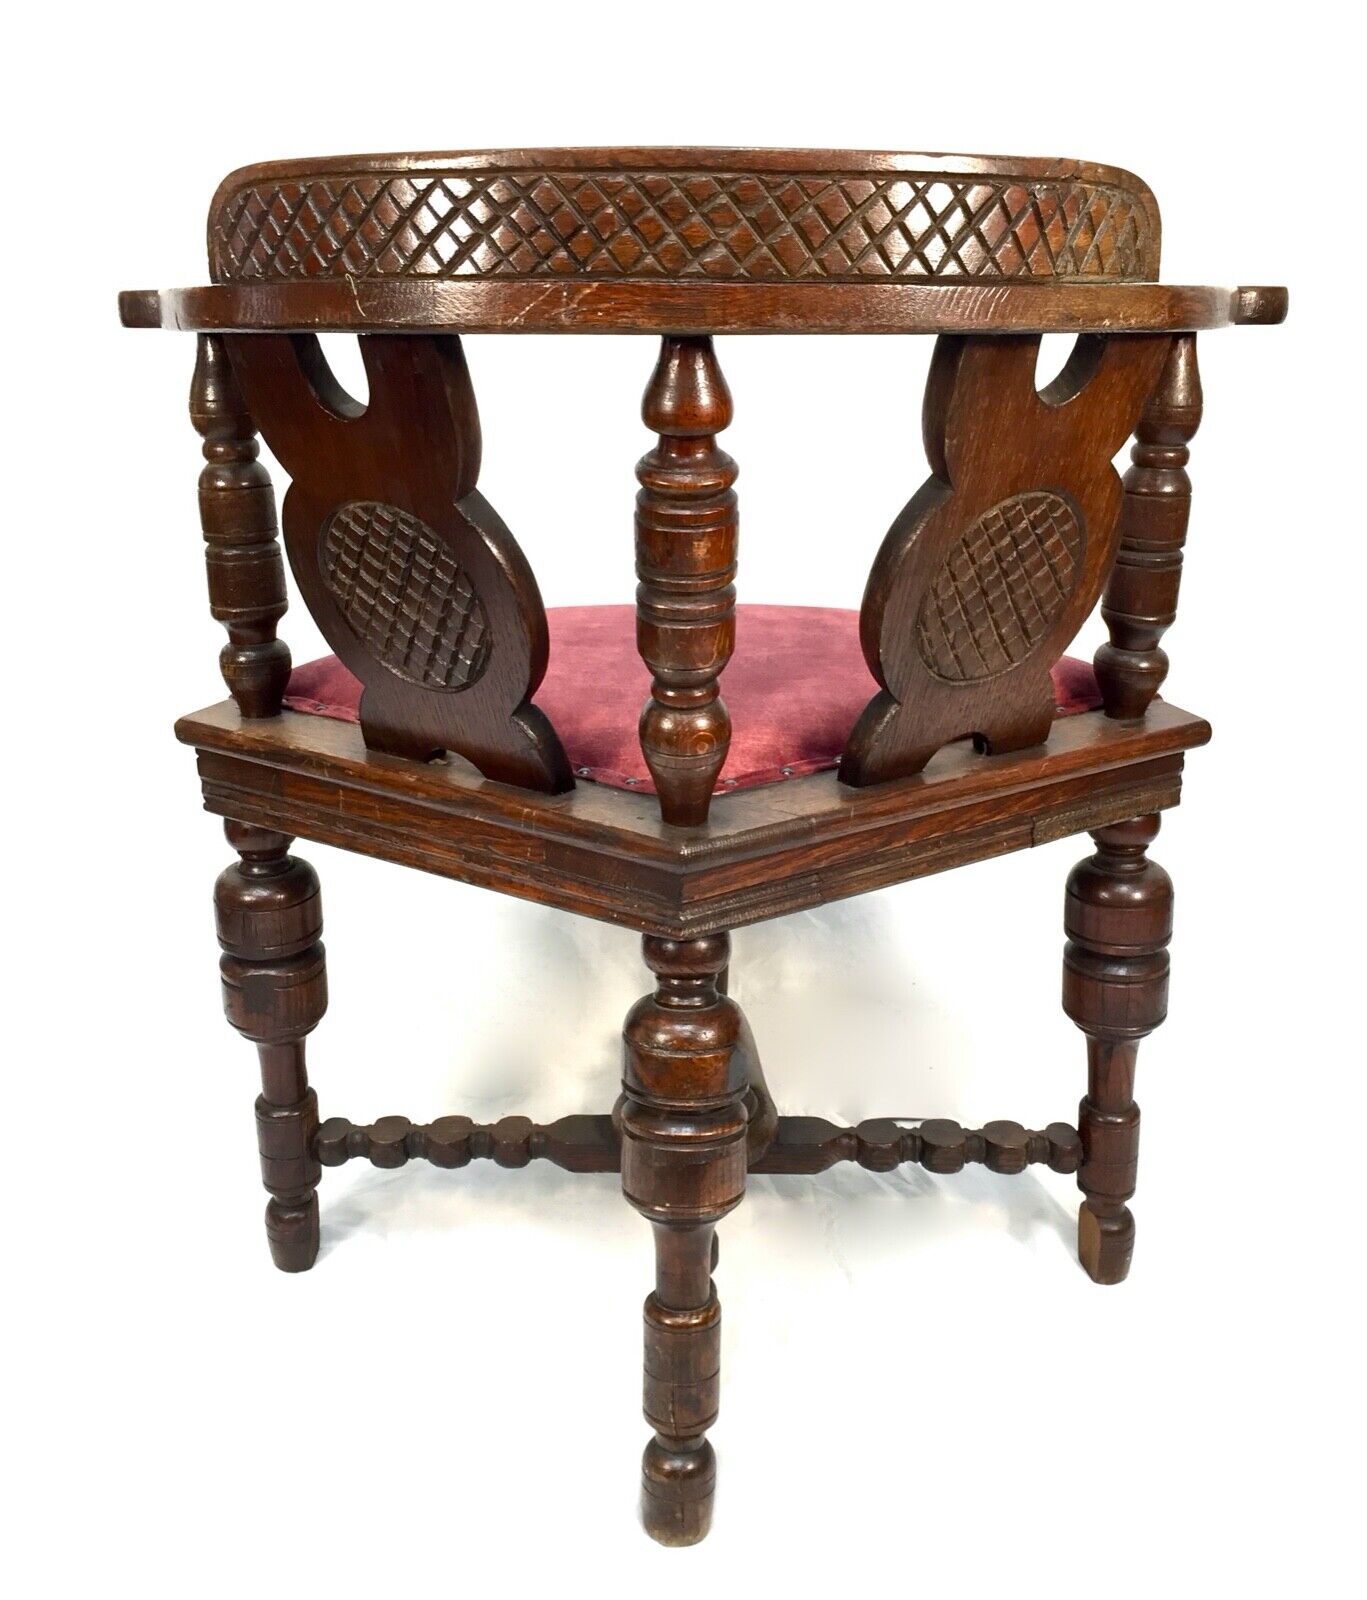 Antique Victorian Carved Oak Wooden Corner Chair Seat - 'Sit At Ease' - c.1870